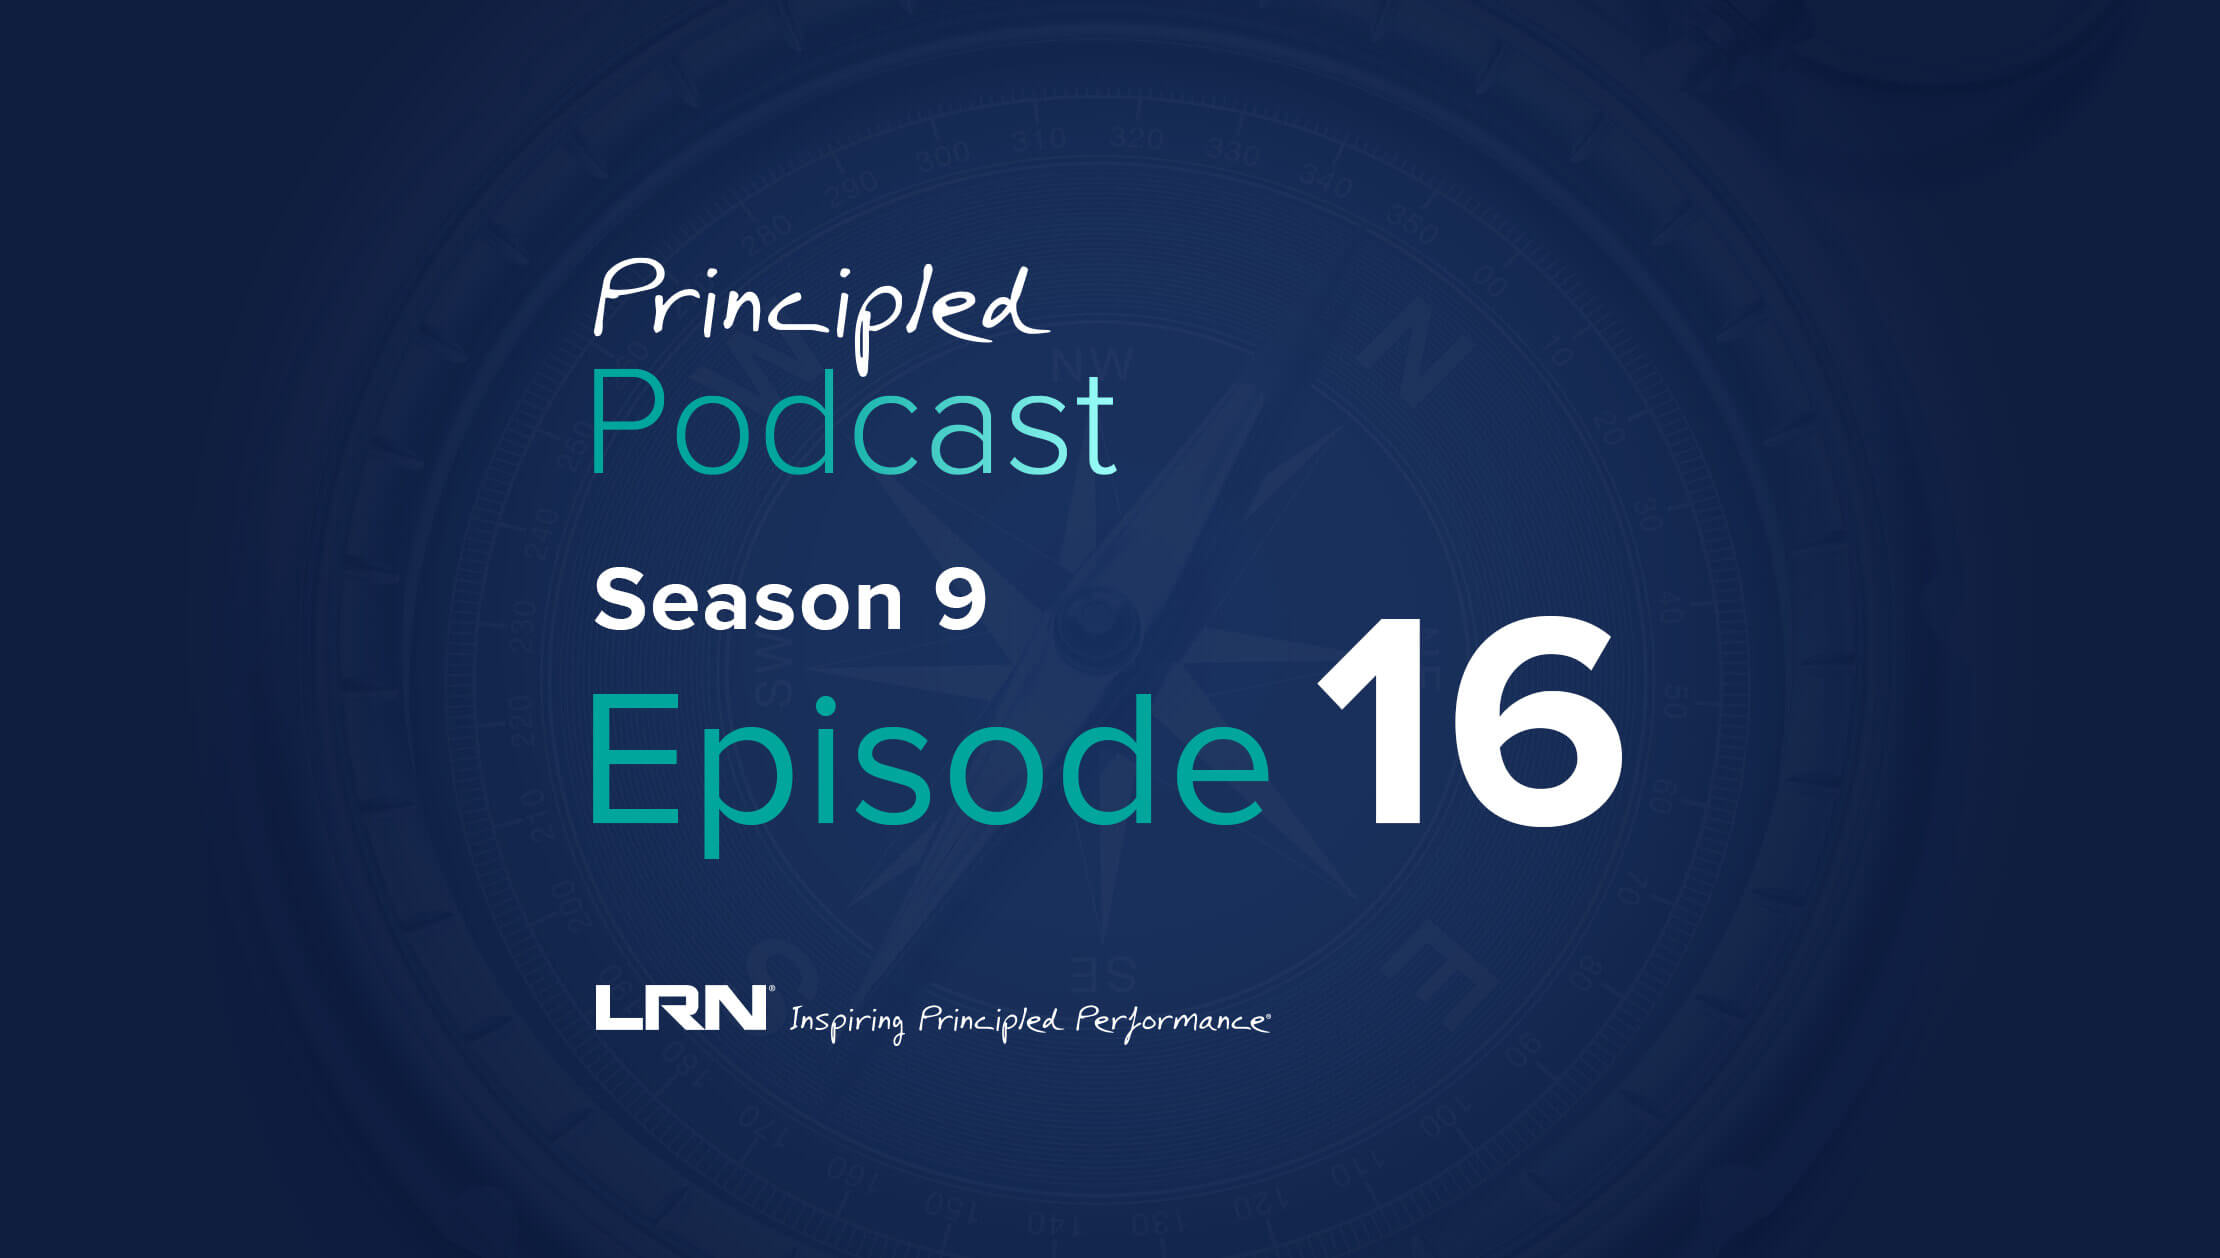 LRN Principled Podcast Season 9 Episode 16 – What does responsible AI and machine learning look like for business leaders?